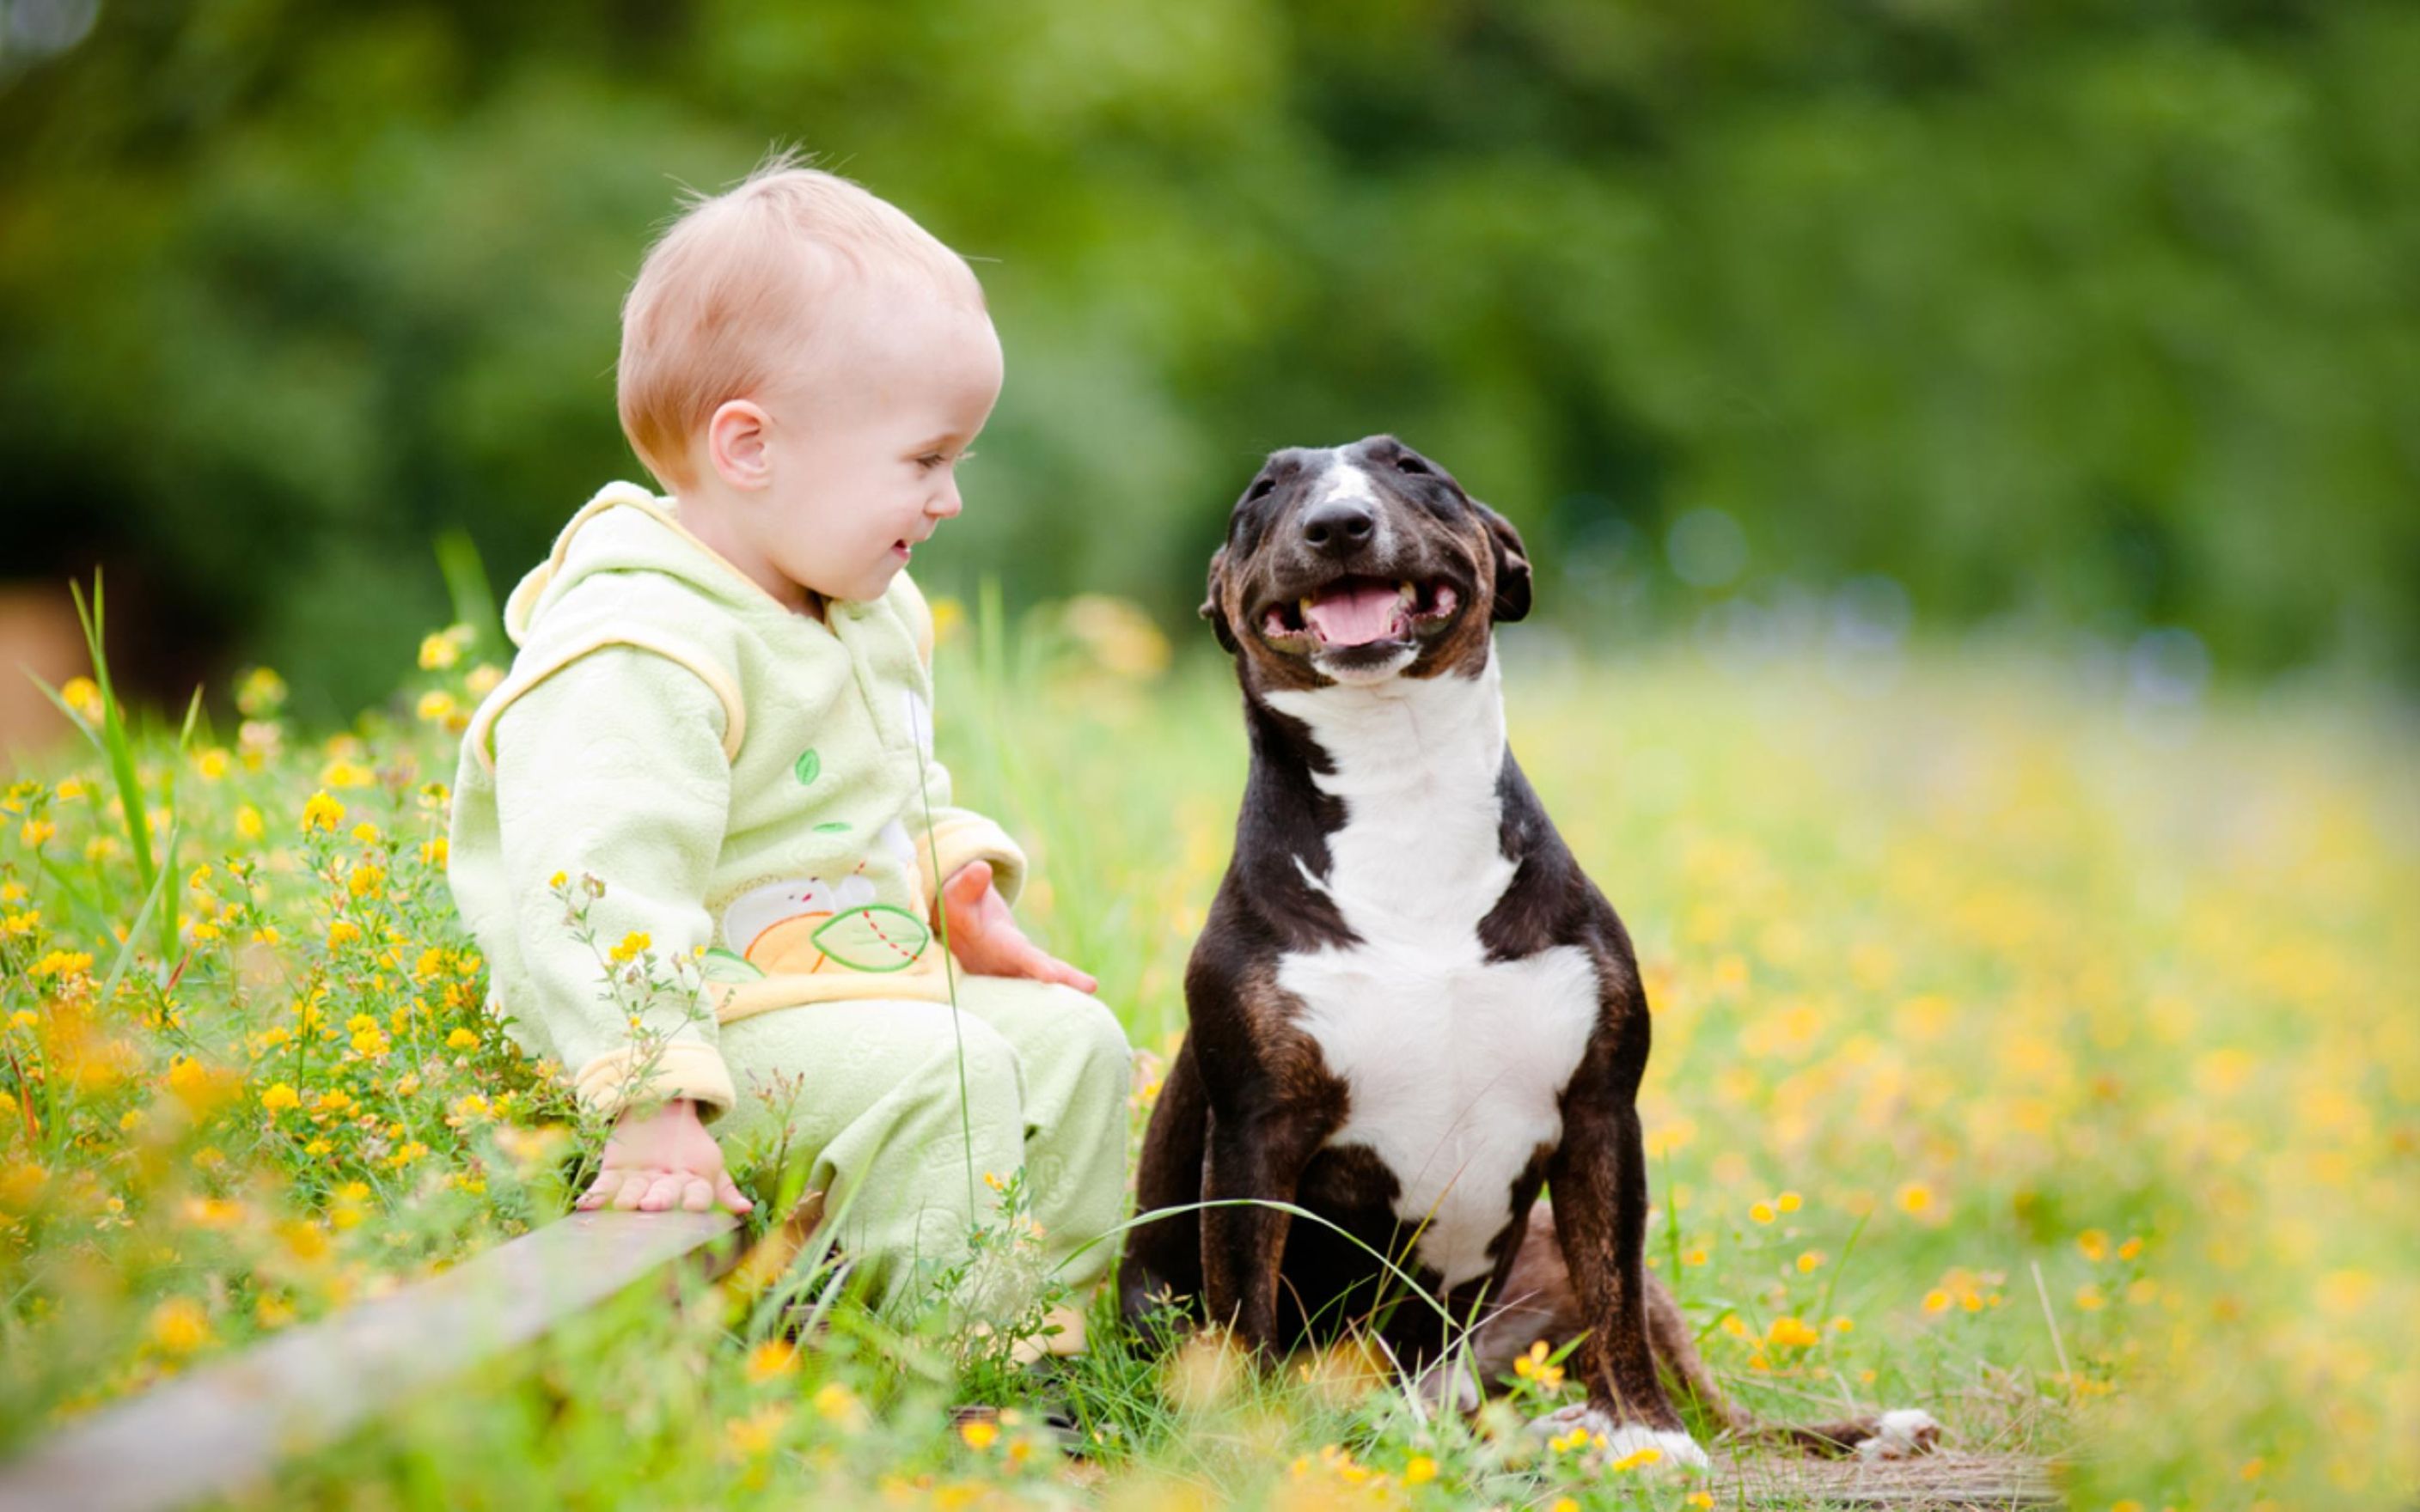 Download Free Hd Cute Image Of A Small Child And Puppy - Cute Dogs And Kids - HD Wallpaper 